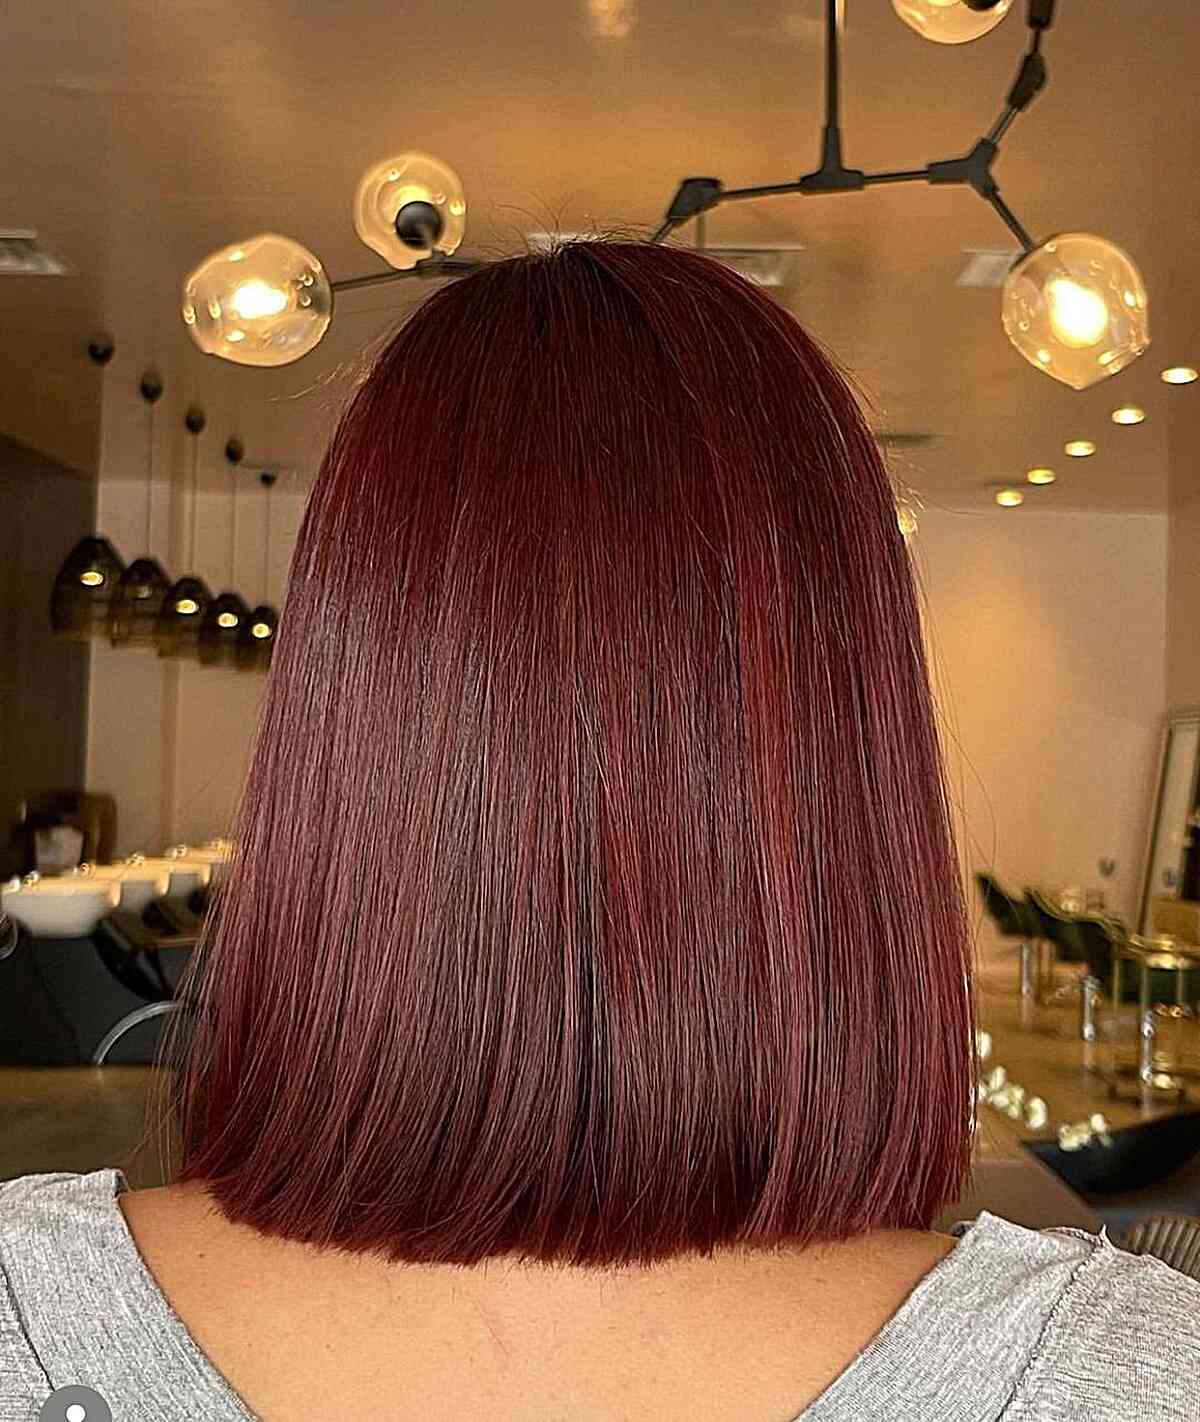 Shoulder-Length Deep Red Burgundy Hair on Straight-Haired Ladies